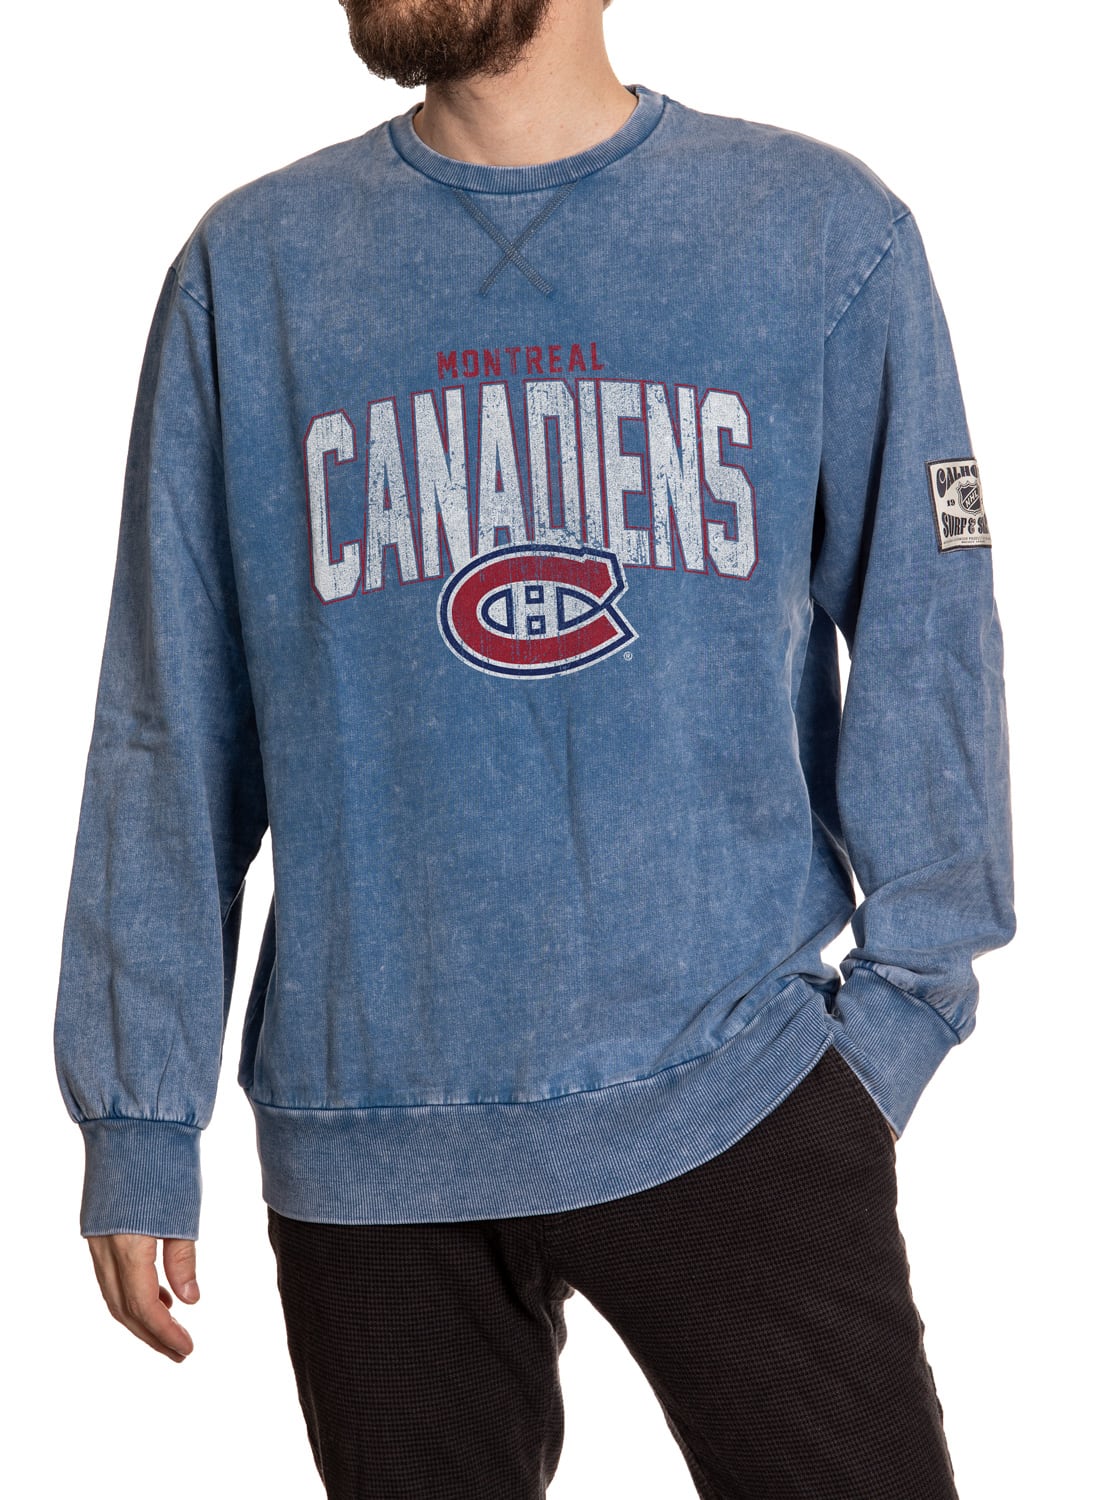 Montreal Canadiens Acid Wash Crewneck in Blue Front View